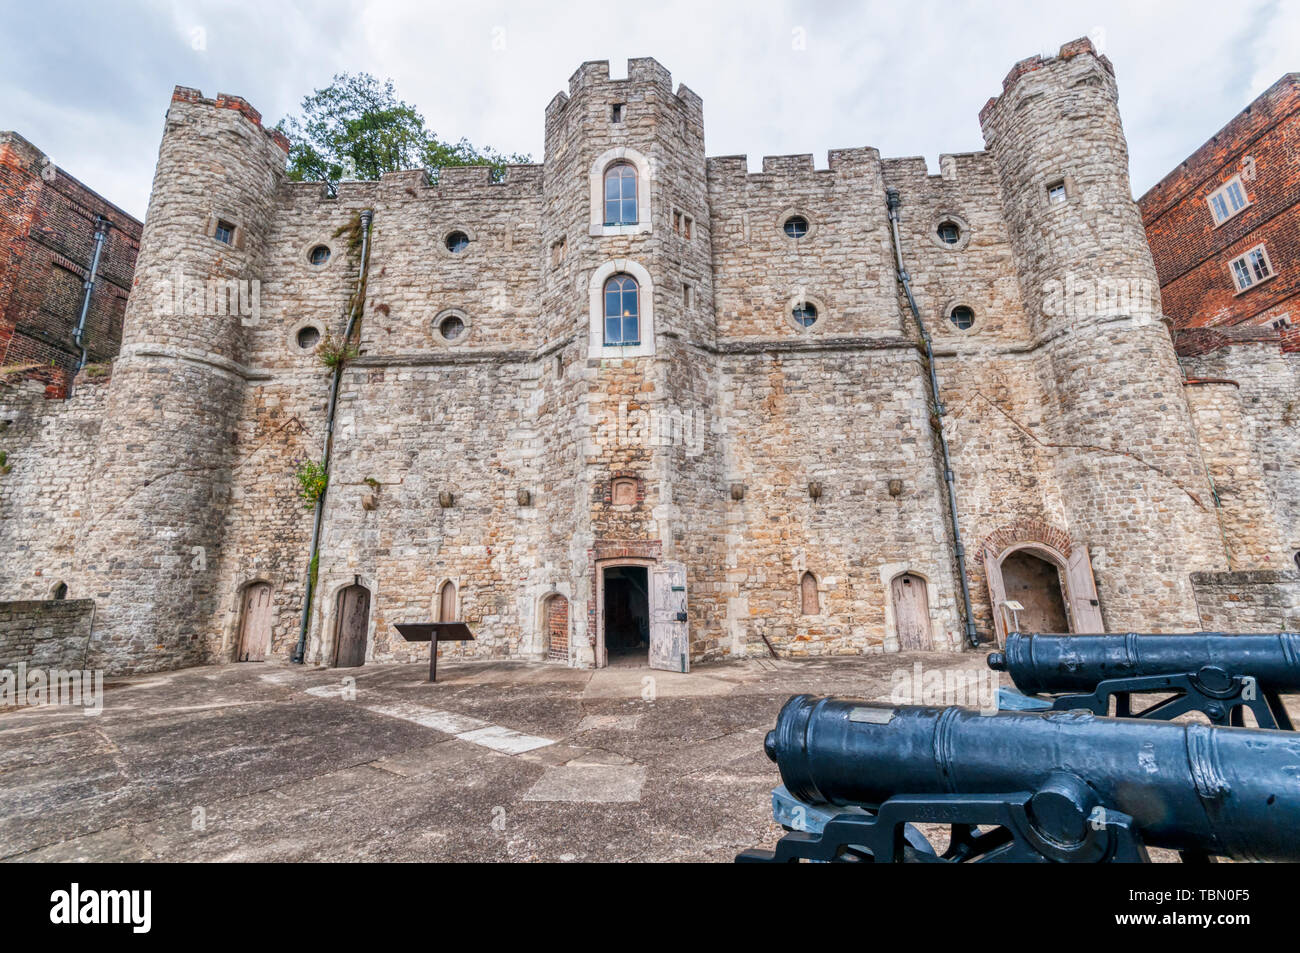 The Elizabethan Upnor Castle on the Hoo peninsula in north Kent, England. Stock Photo